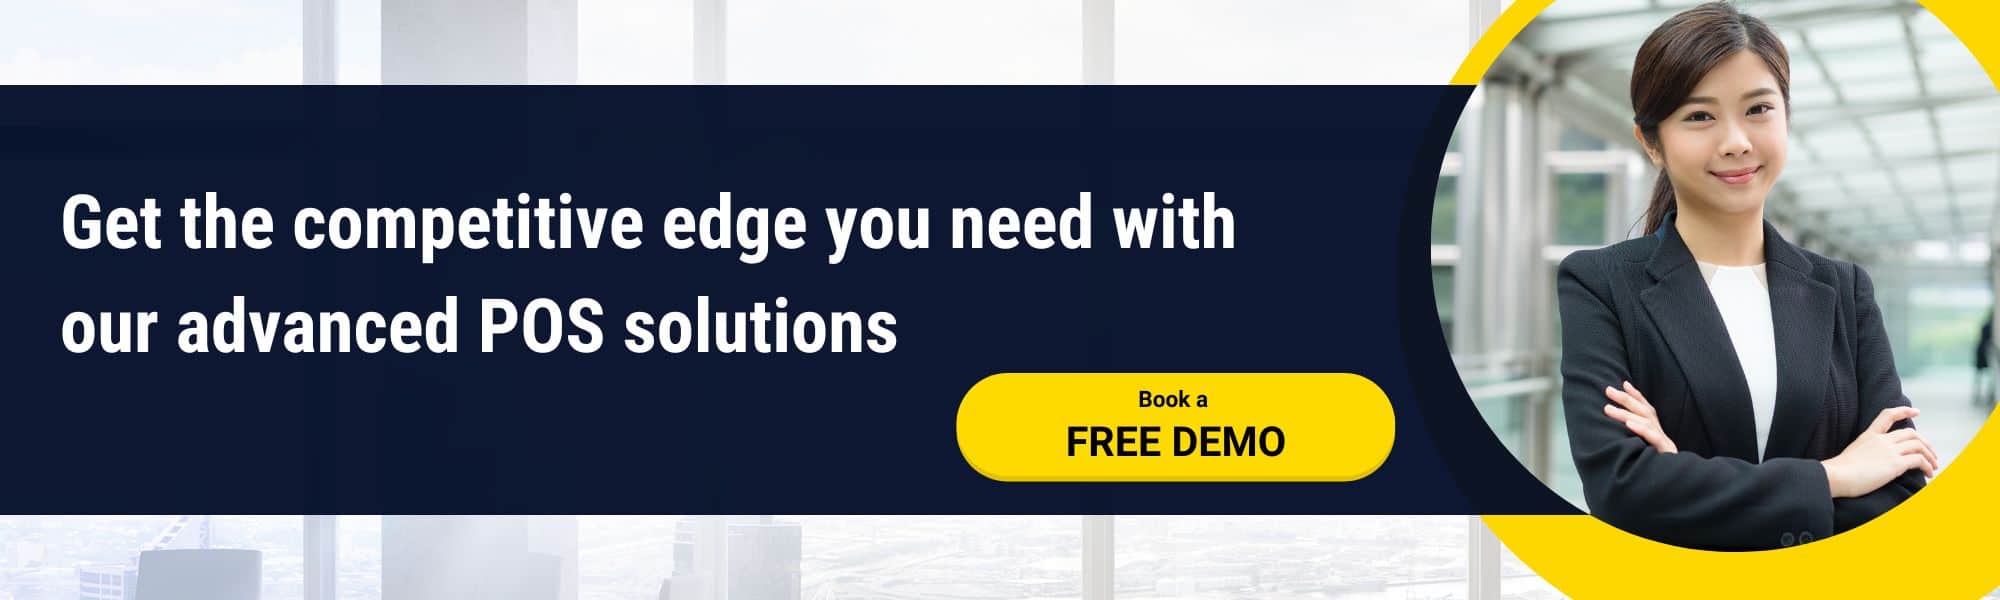 Image of a call to action banner promoting Retail POS System. The banner text reads 'Get the Competitive Edge you need with our advanced POS solutions', encouraging businesses to gain an advantage in their market with these solutions